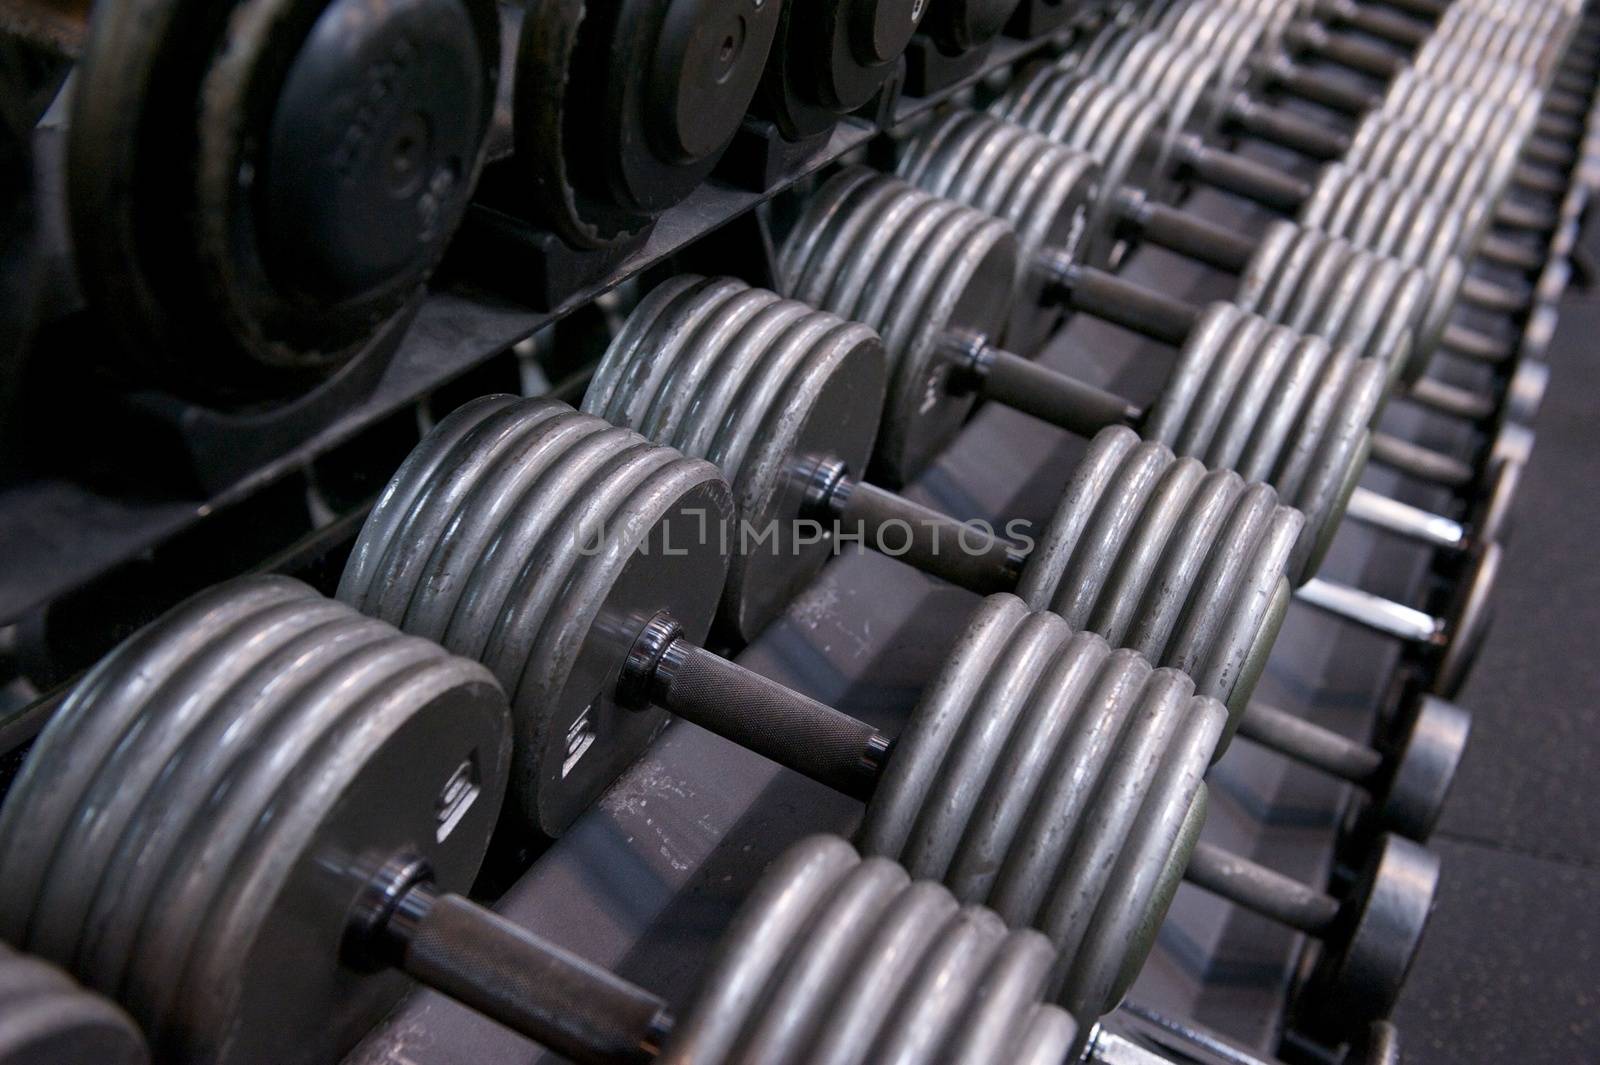 Rack of Dumbbells at a Professional Gym by pixelsnap